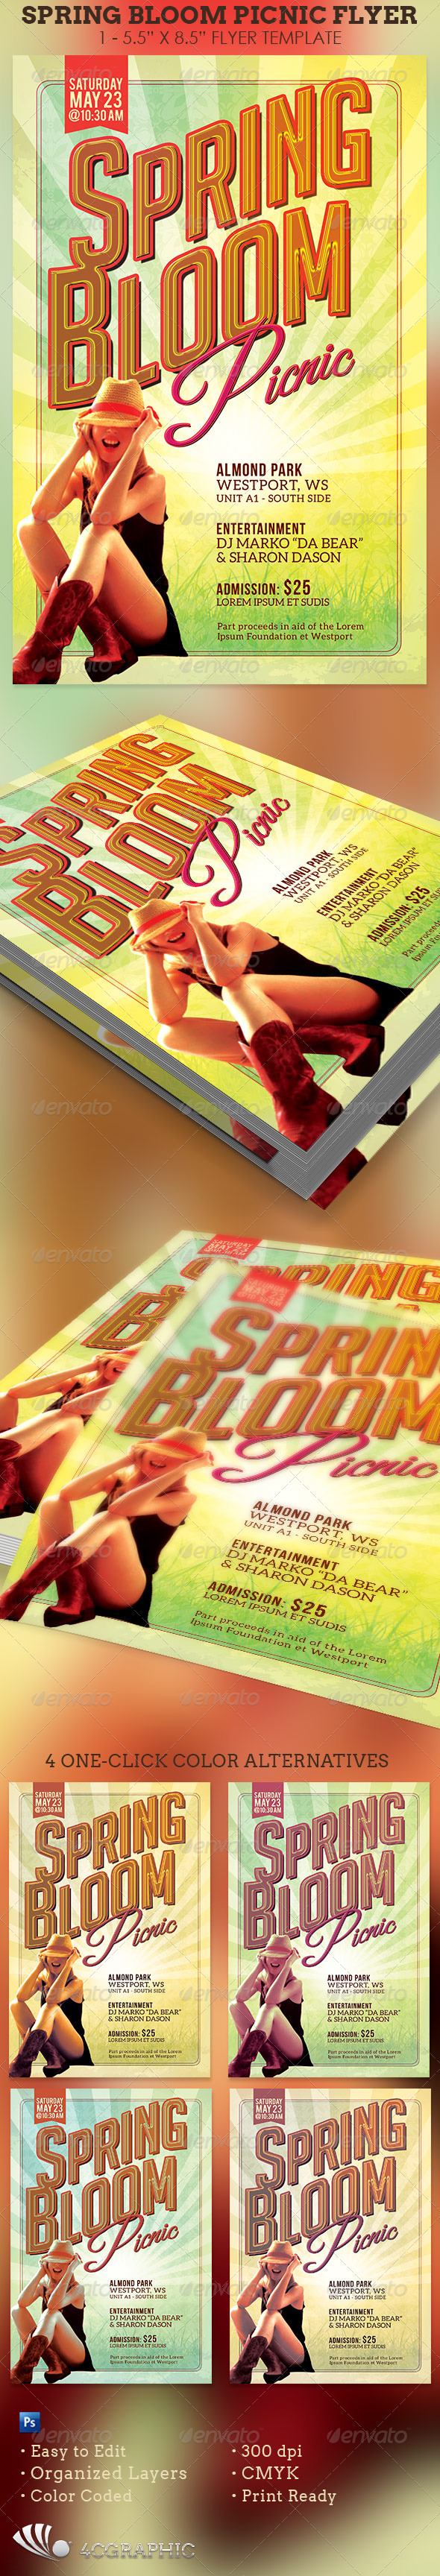 Spring Bloom Picnic Flyer Template